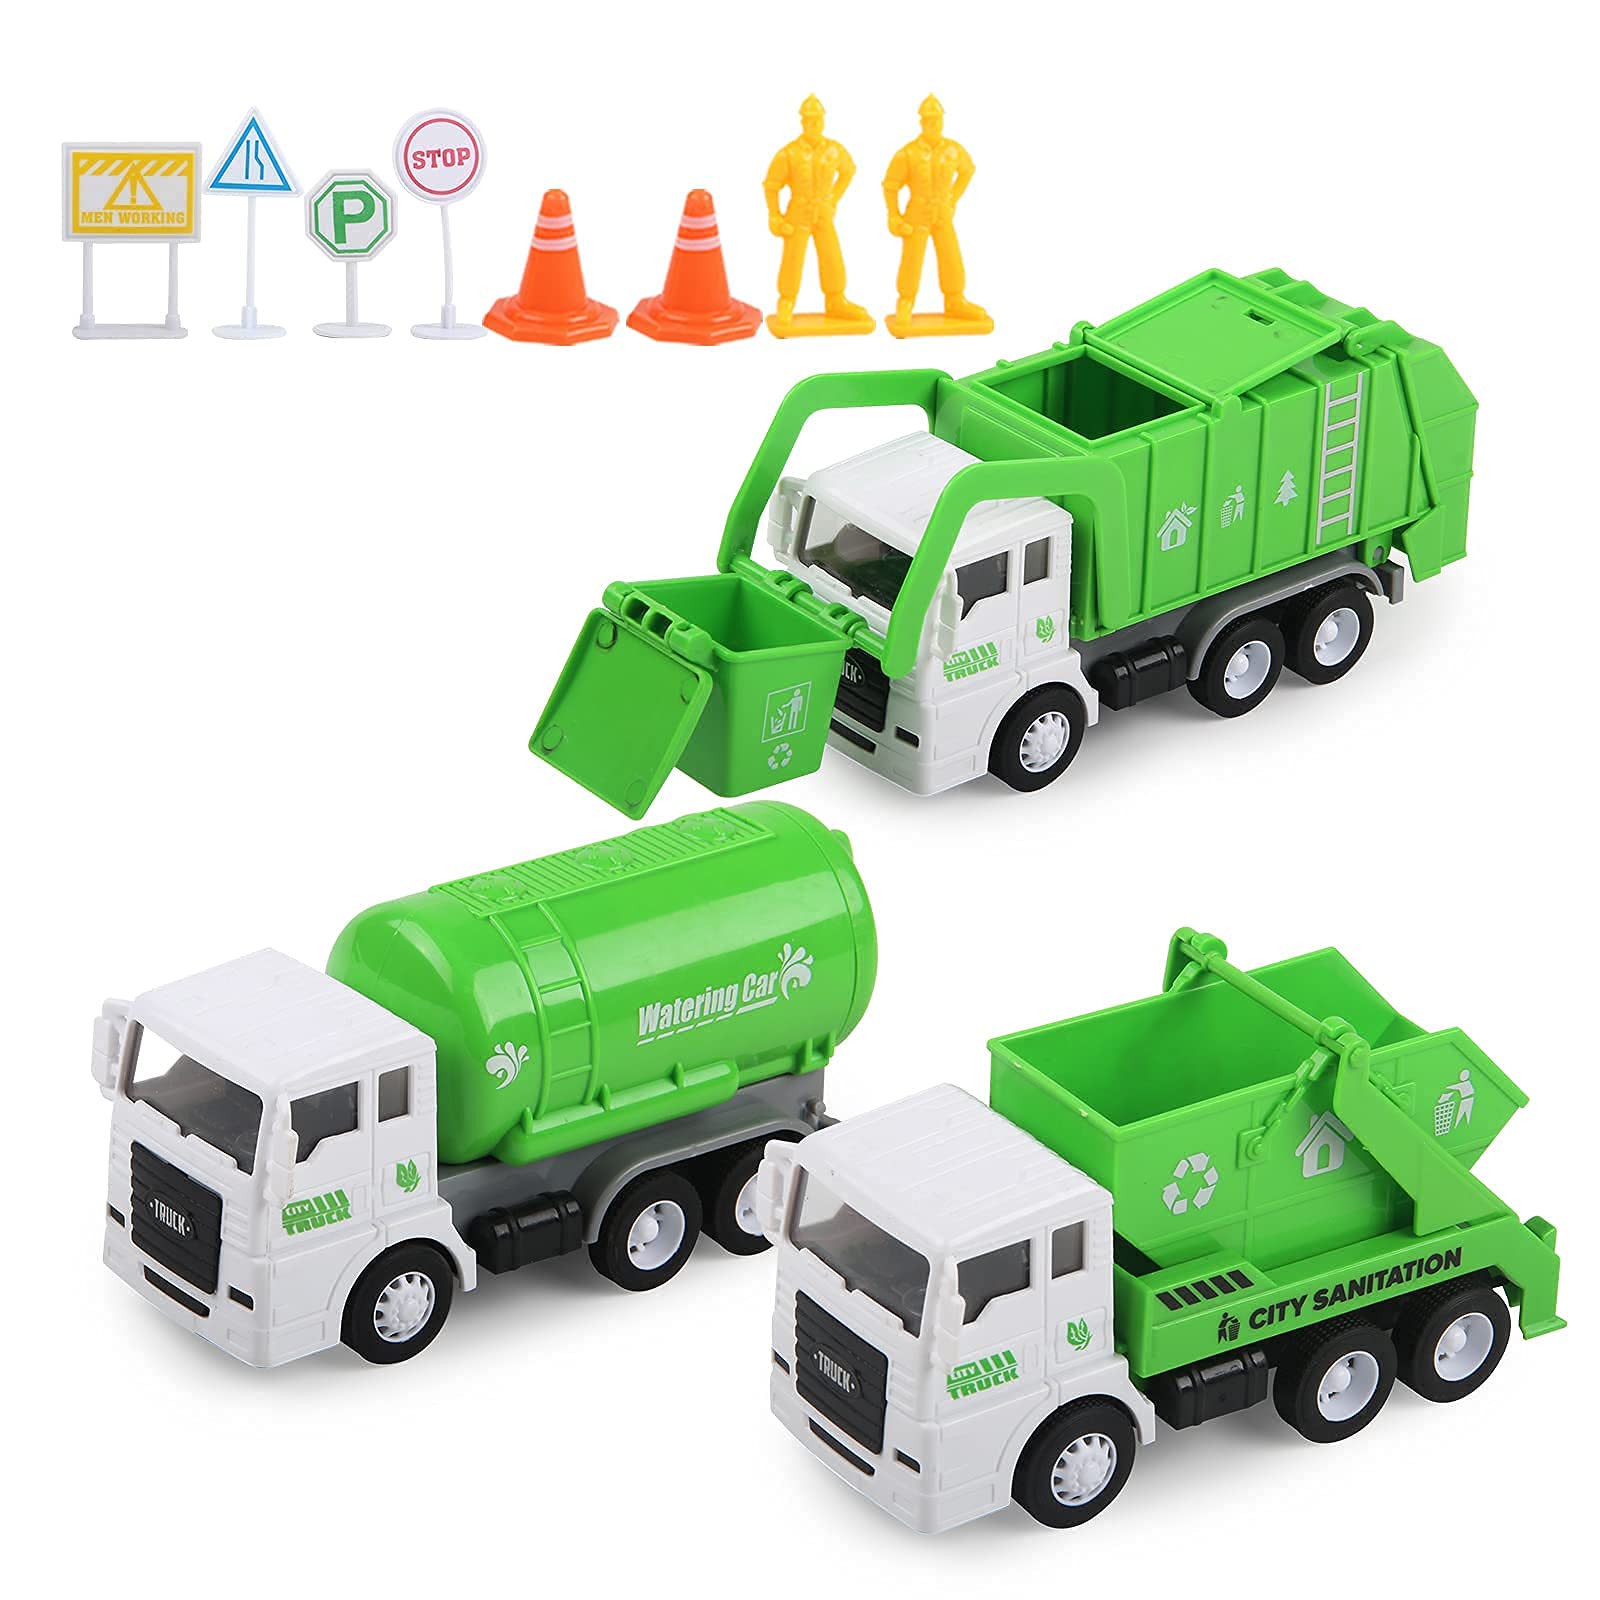 FIVEDAOgANg Toy Vehicles Set 3 Pack Sanitation Truck car Model garbage Trucks Water Tanker Playset with 8 Signpost Friction Powe